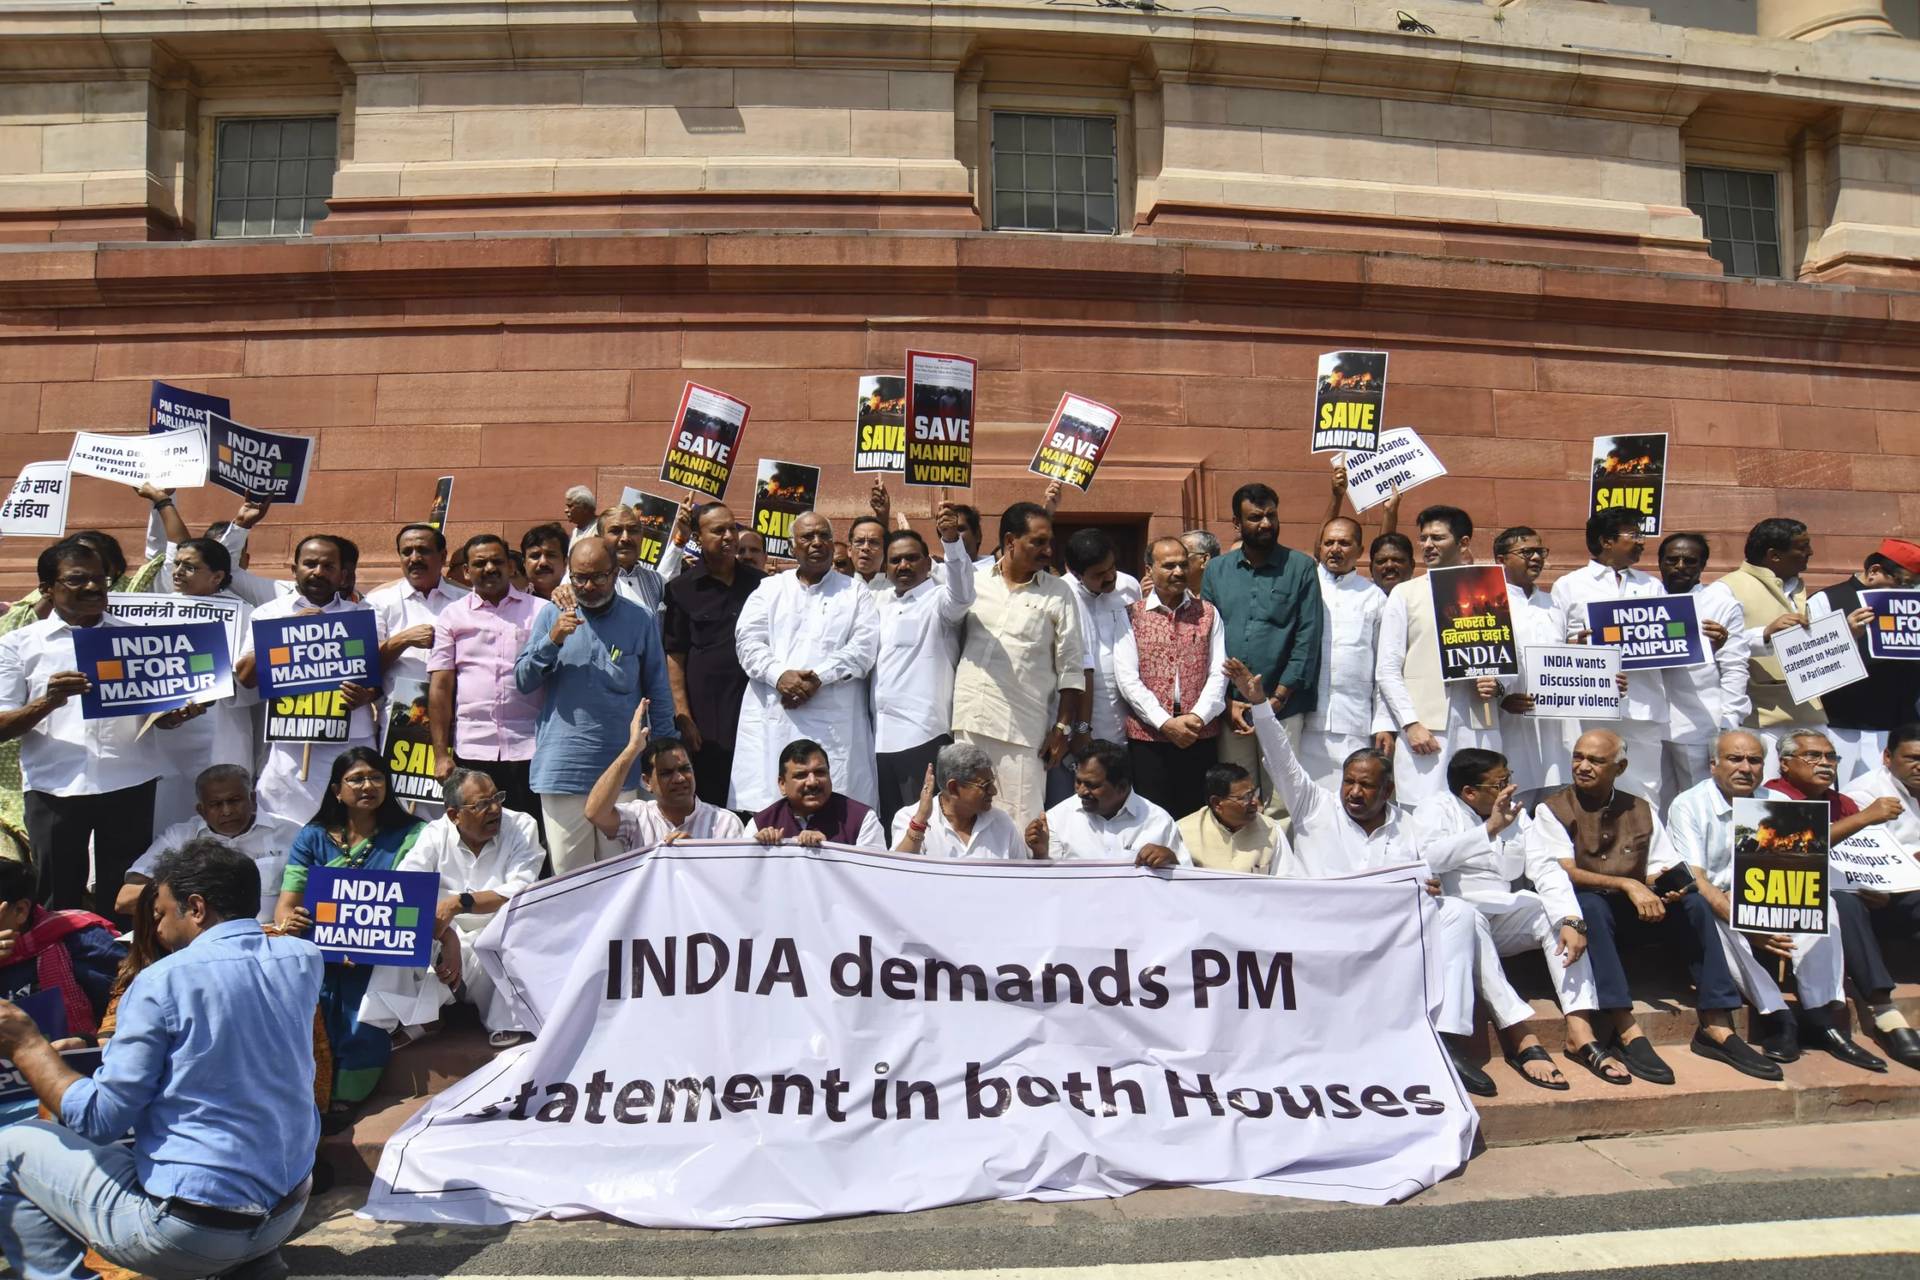 Opposition lawmakers demanding a statement from Prime Minister Narendra Modi on the violence in Manipur state carry placards and a banner with name of “INDIA” outside the Parliament building in New Delhi, India, July 24, 2023. (Credit: Altaf Qadri/AP.)